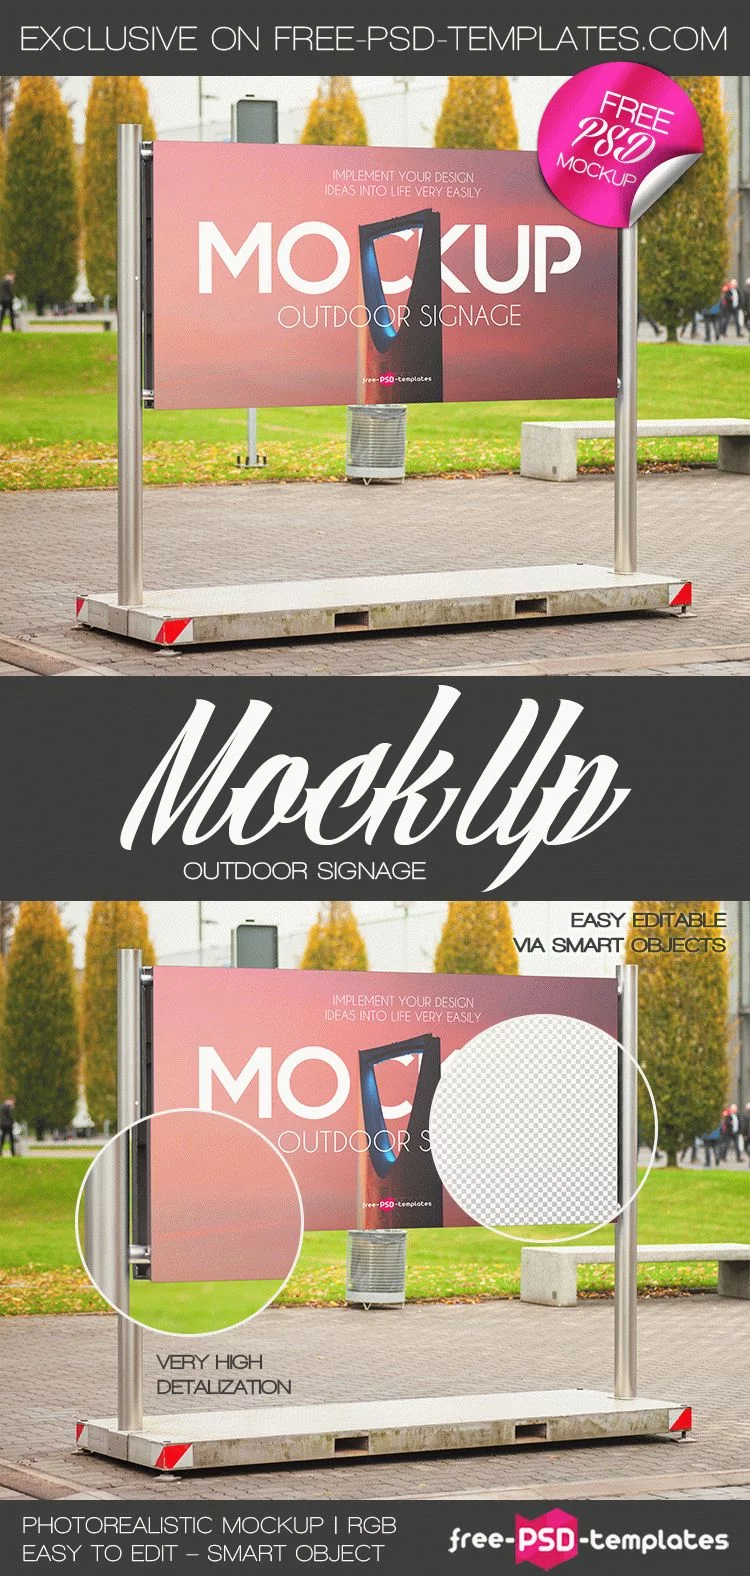 Free Outdoor Signage Mock-up in PSD